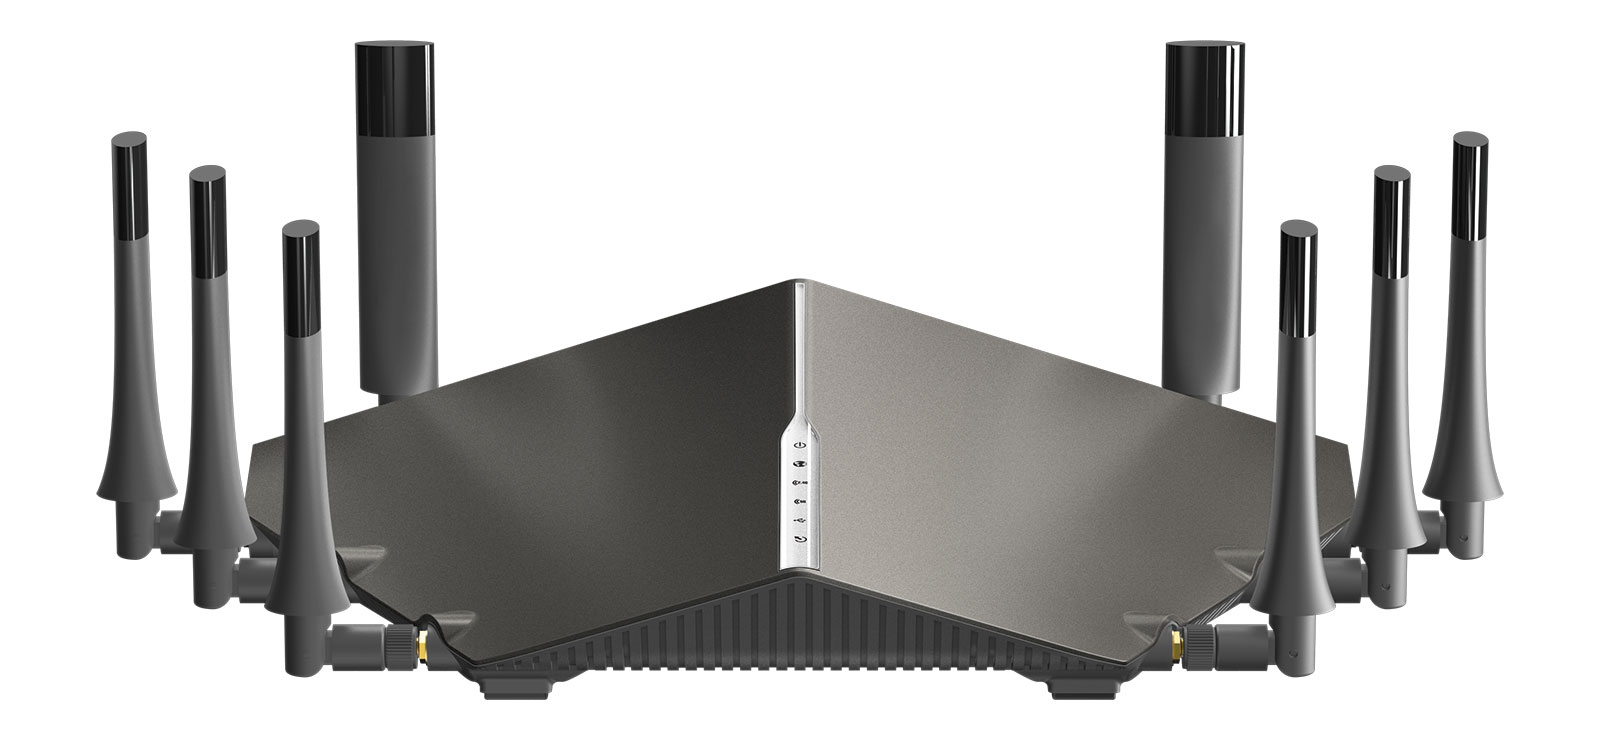 dlink cobra dsl 5300 2017 03 REVIEW: New Netgear Pro Vs D Link Cobra Which One Is The Best Kick Arse Router